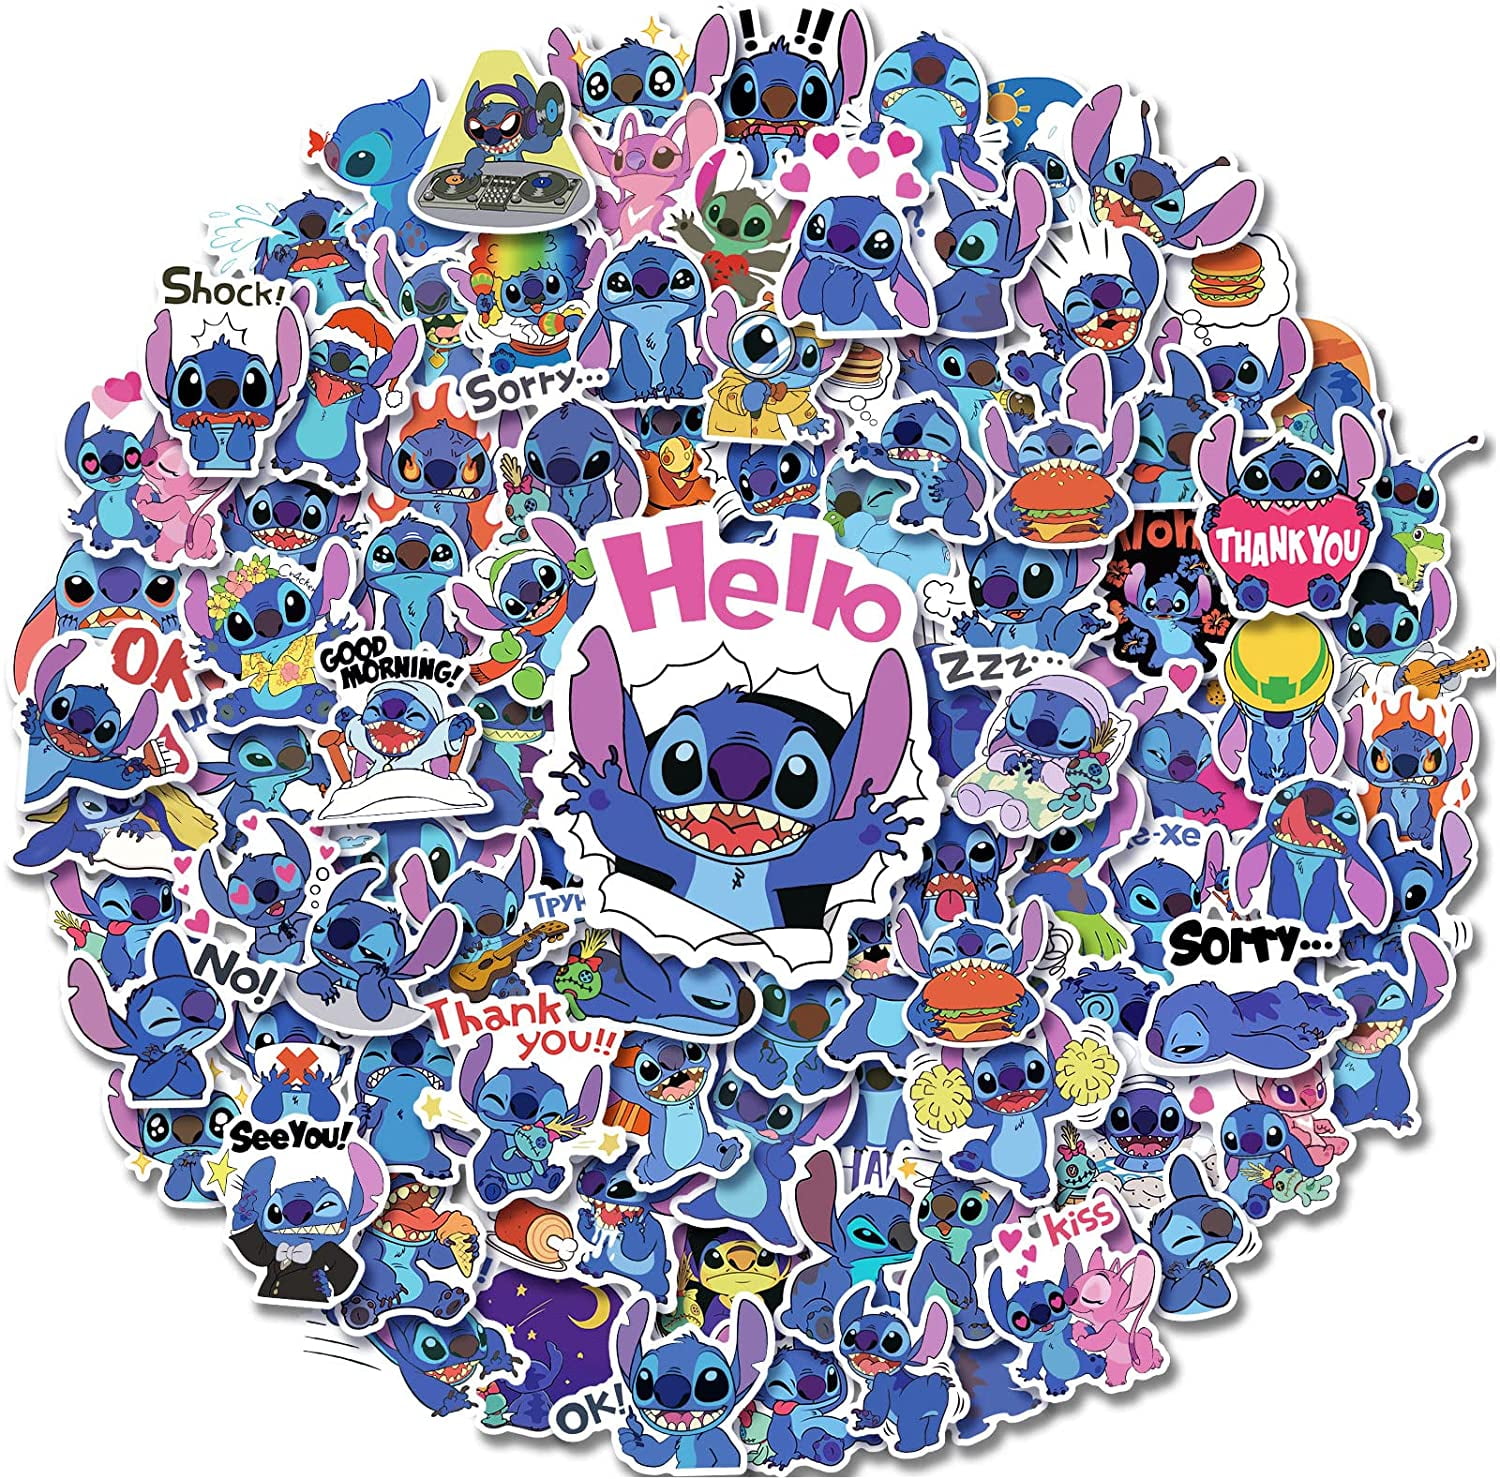 Disney Stitch Stickers 50Pcs Lilo Stitch Cute Cartoon Stickers Scrapbooking  Stickers For Luggage Laptop Notebook Car Toy Phone